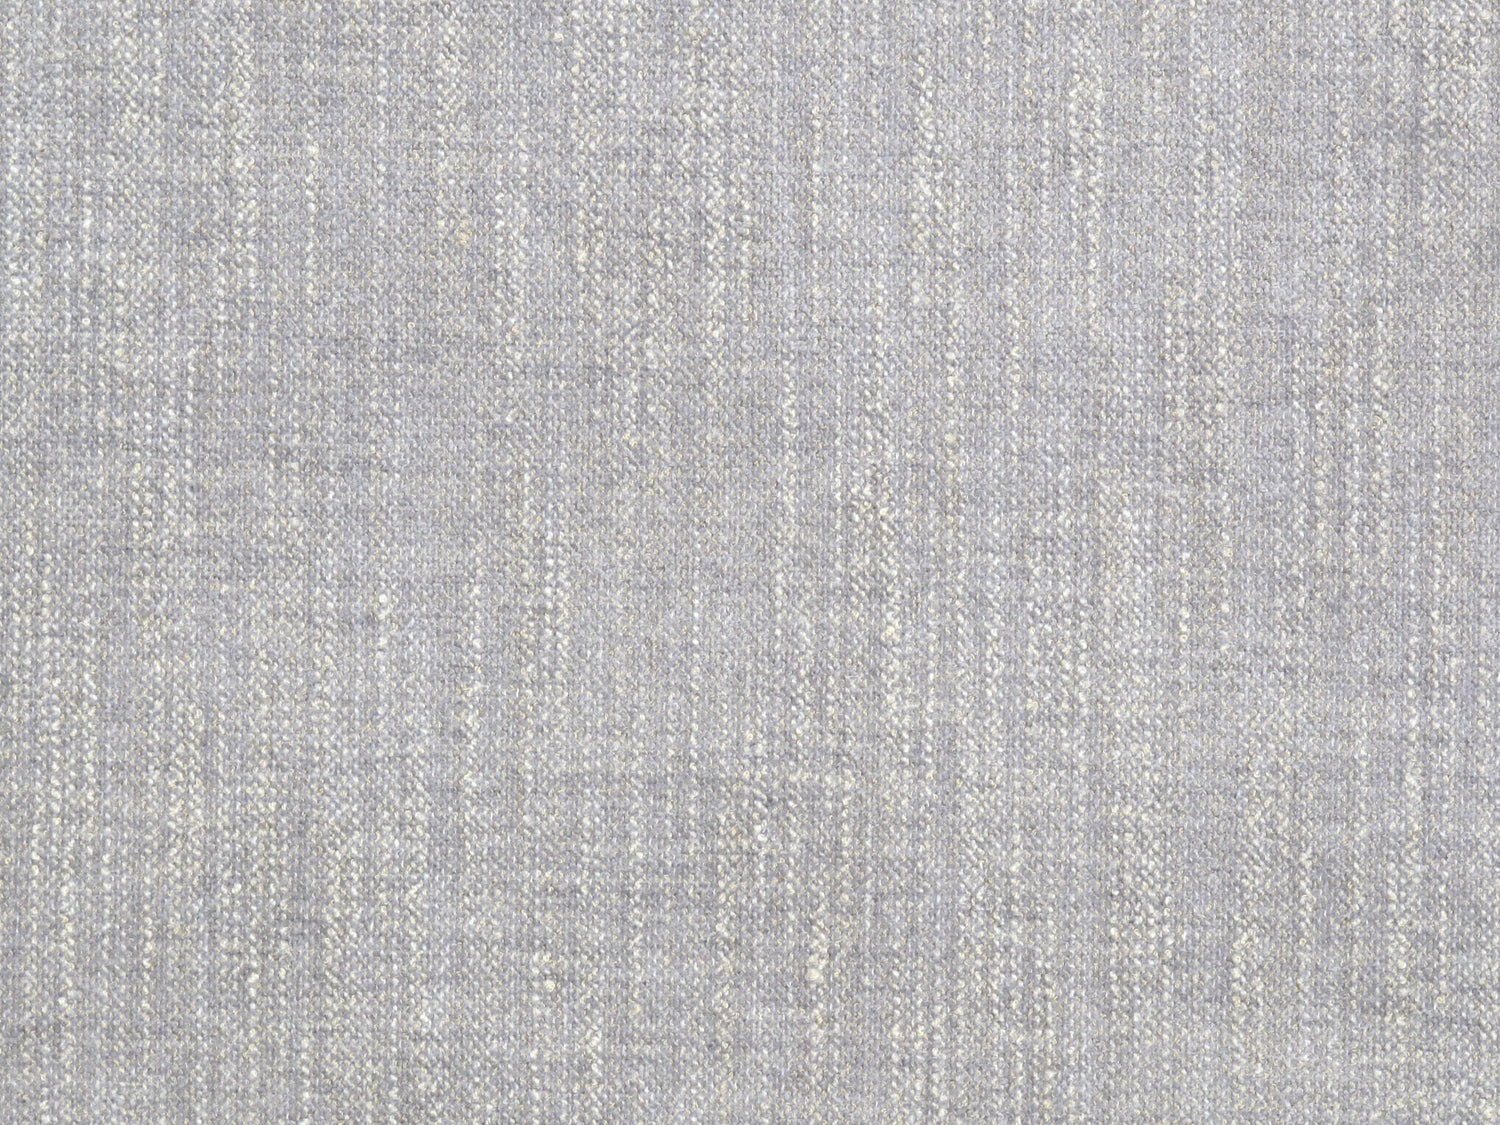 Tamil fabric in harbor mist color - pattern number PN 00101249 - by Scalamandre in the Old World Weavers collection